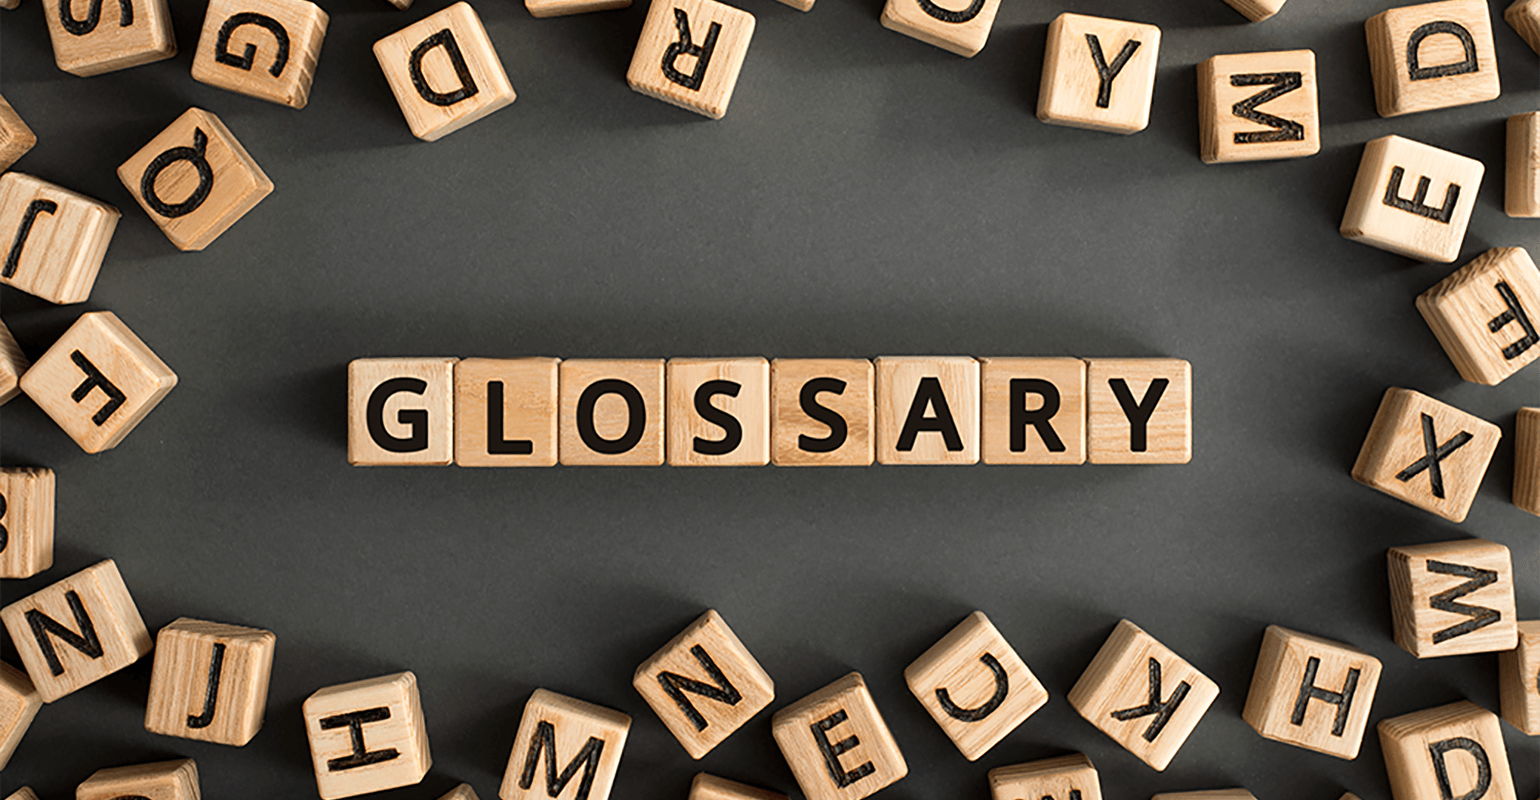 An image of random scrabble letters. In the center the scrabble letters spell out 'glossary'